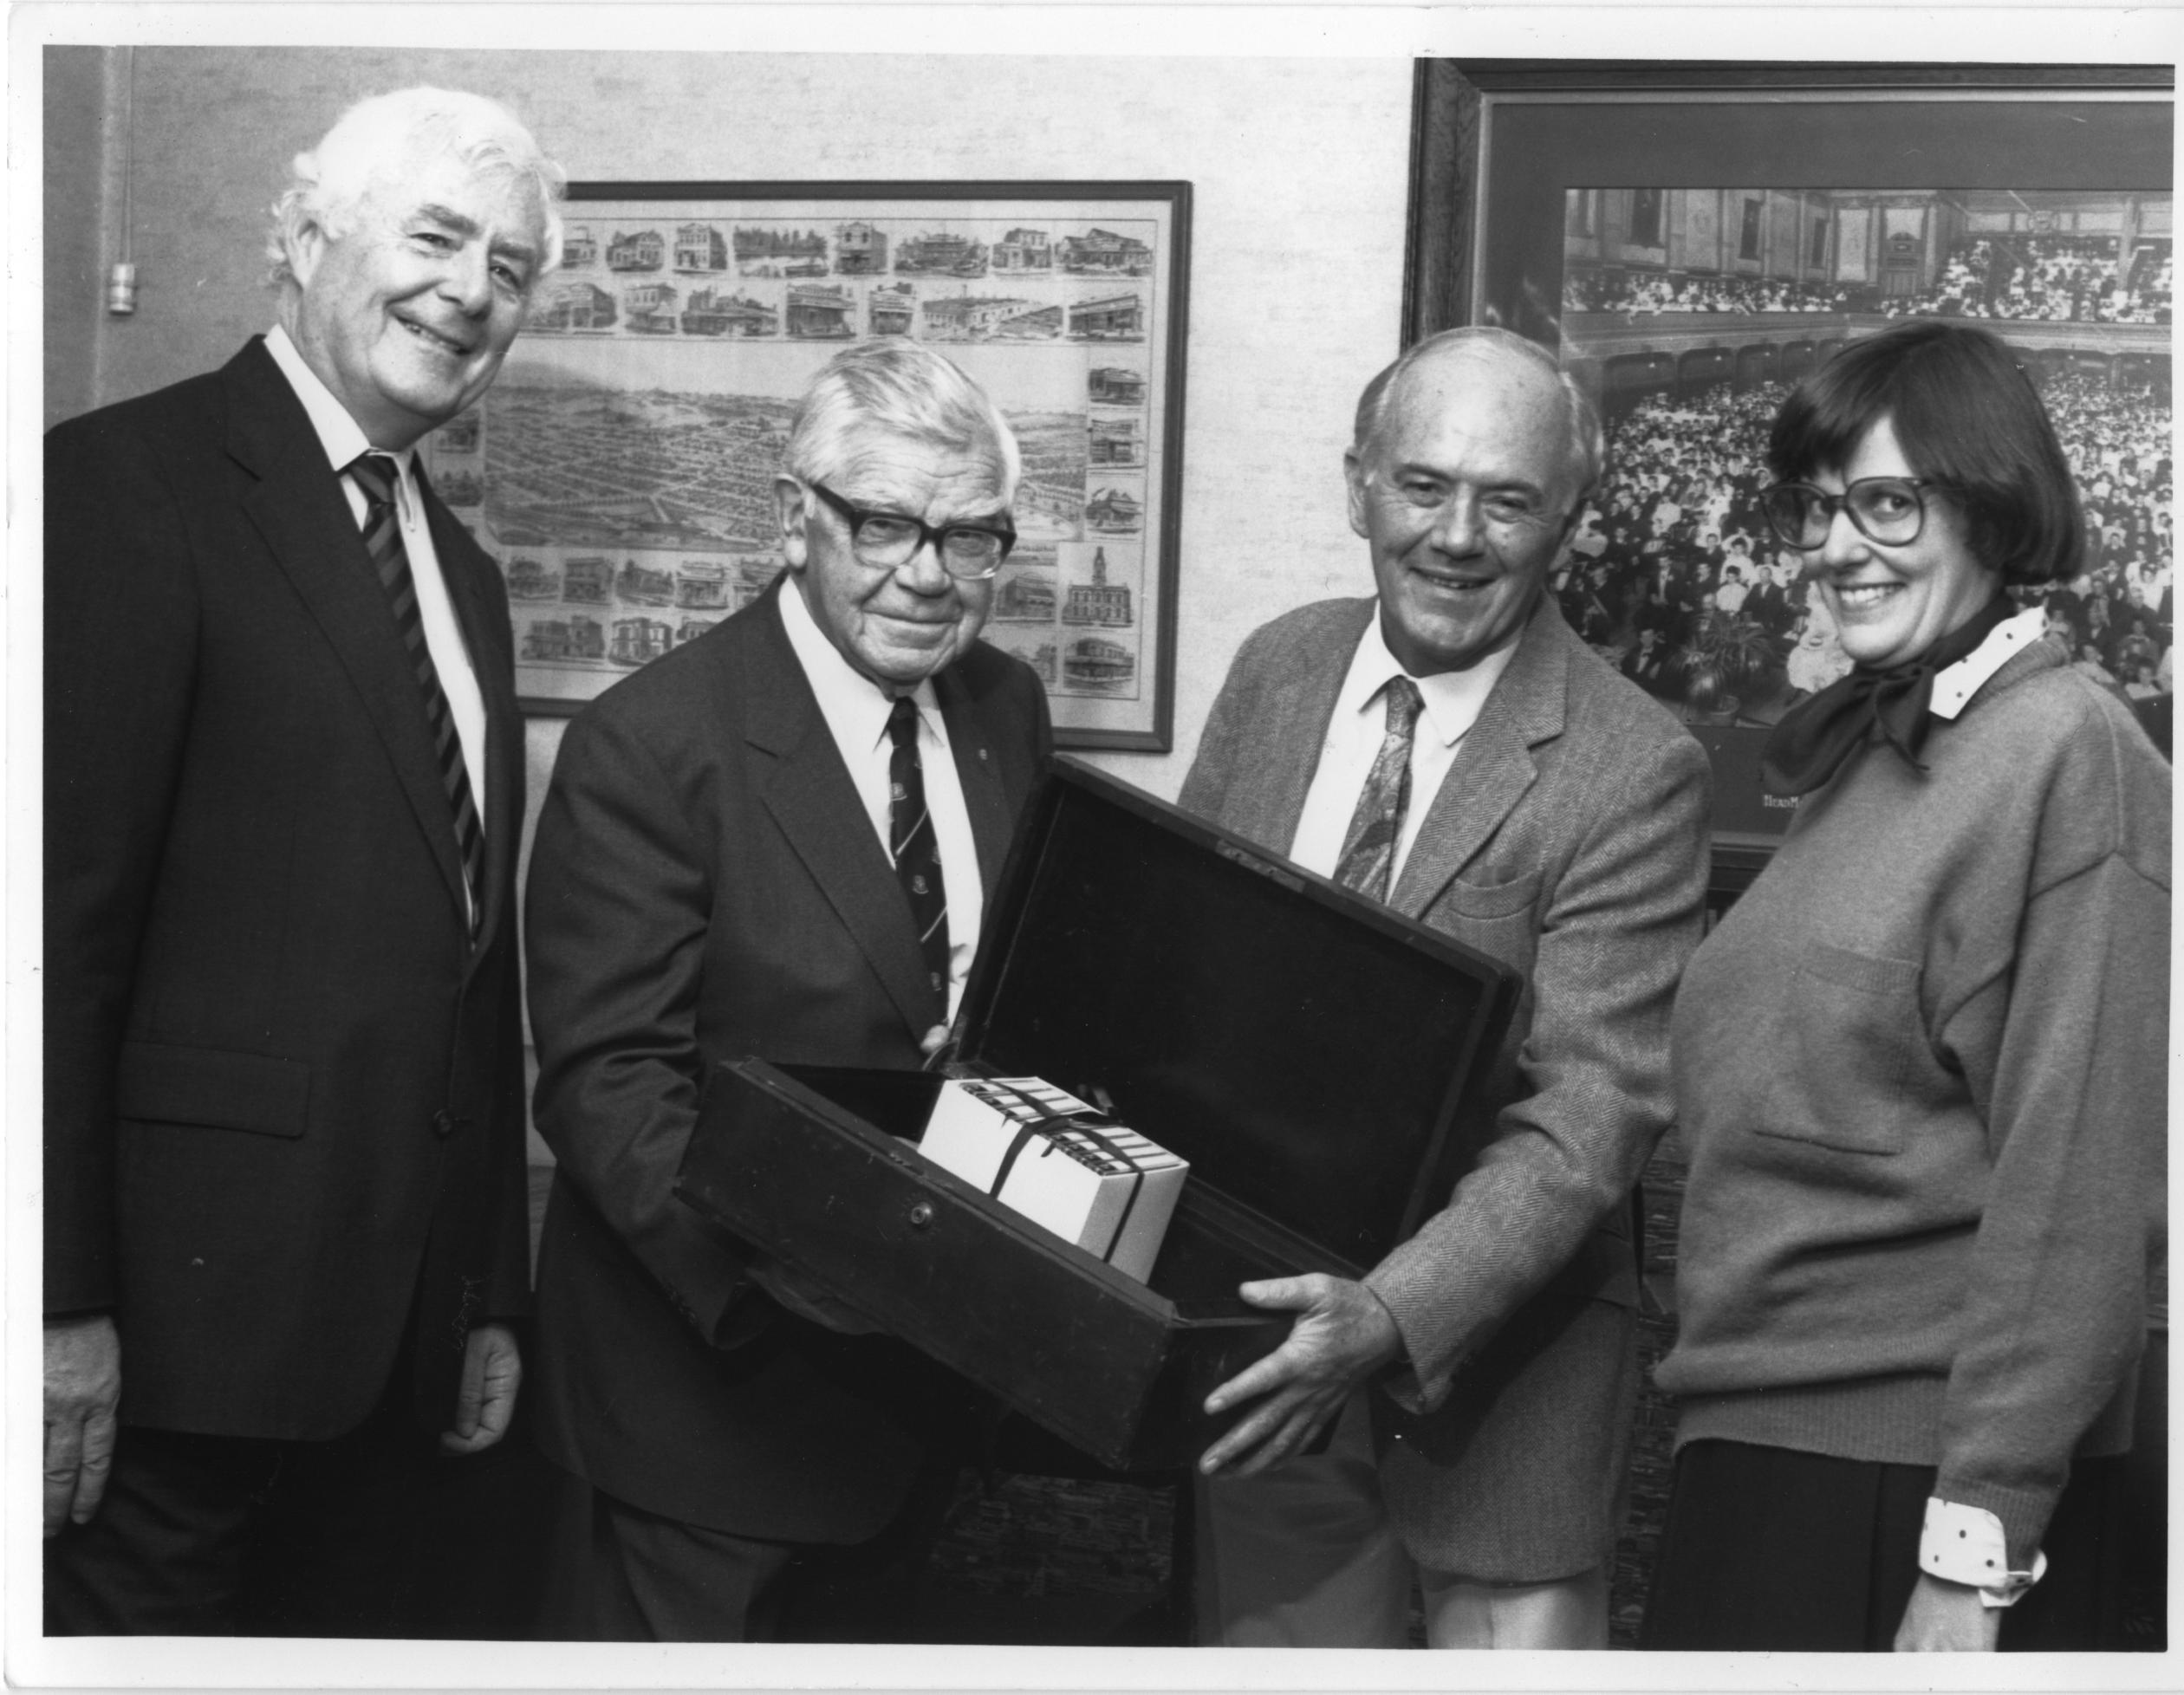 Professor John Power (left), with 'Pansy' Wright, Frank Strahan and Guinevere Threlkeld